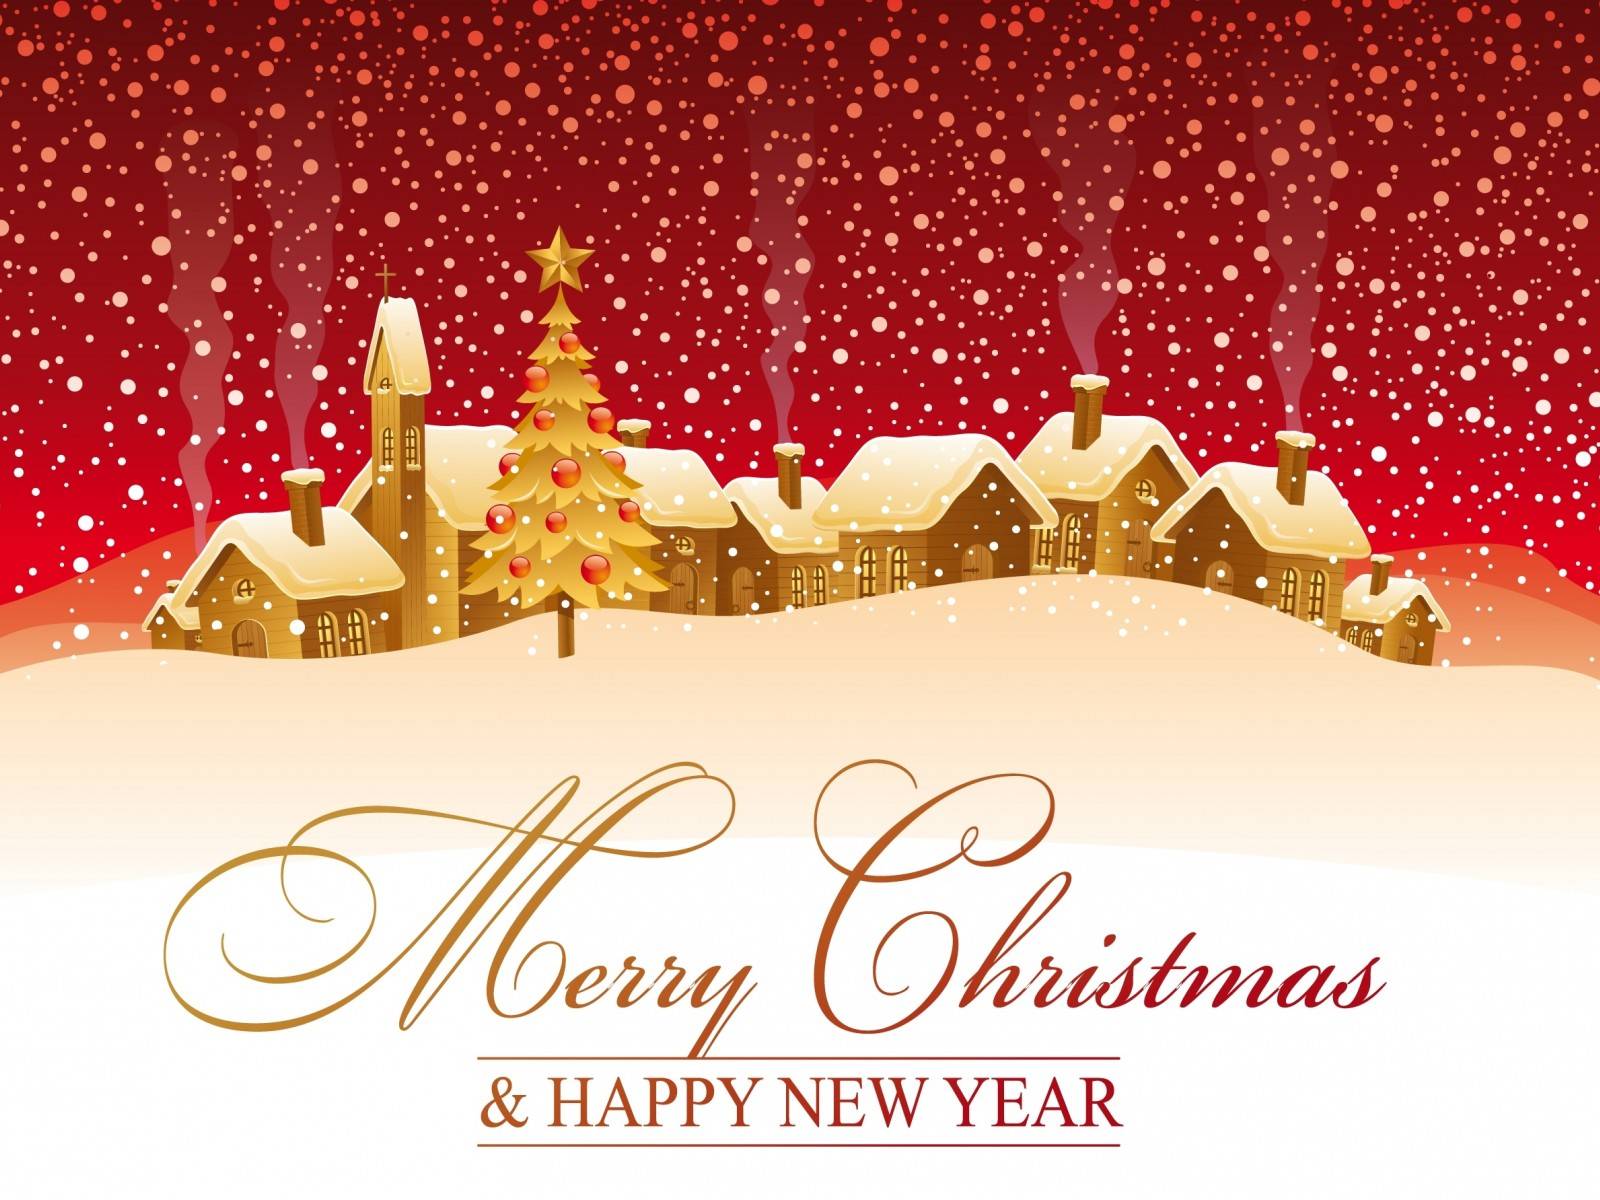 Merry Christmas 2015 Wallpaper New Year 2017. Happy New